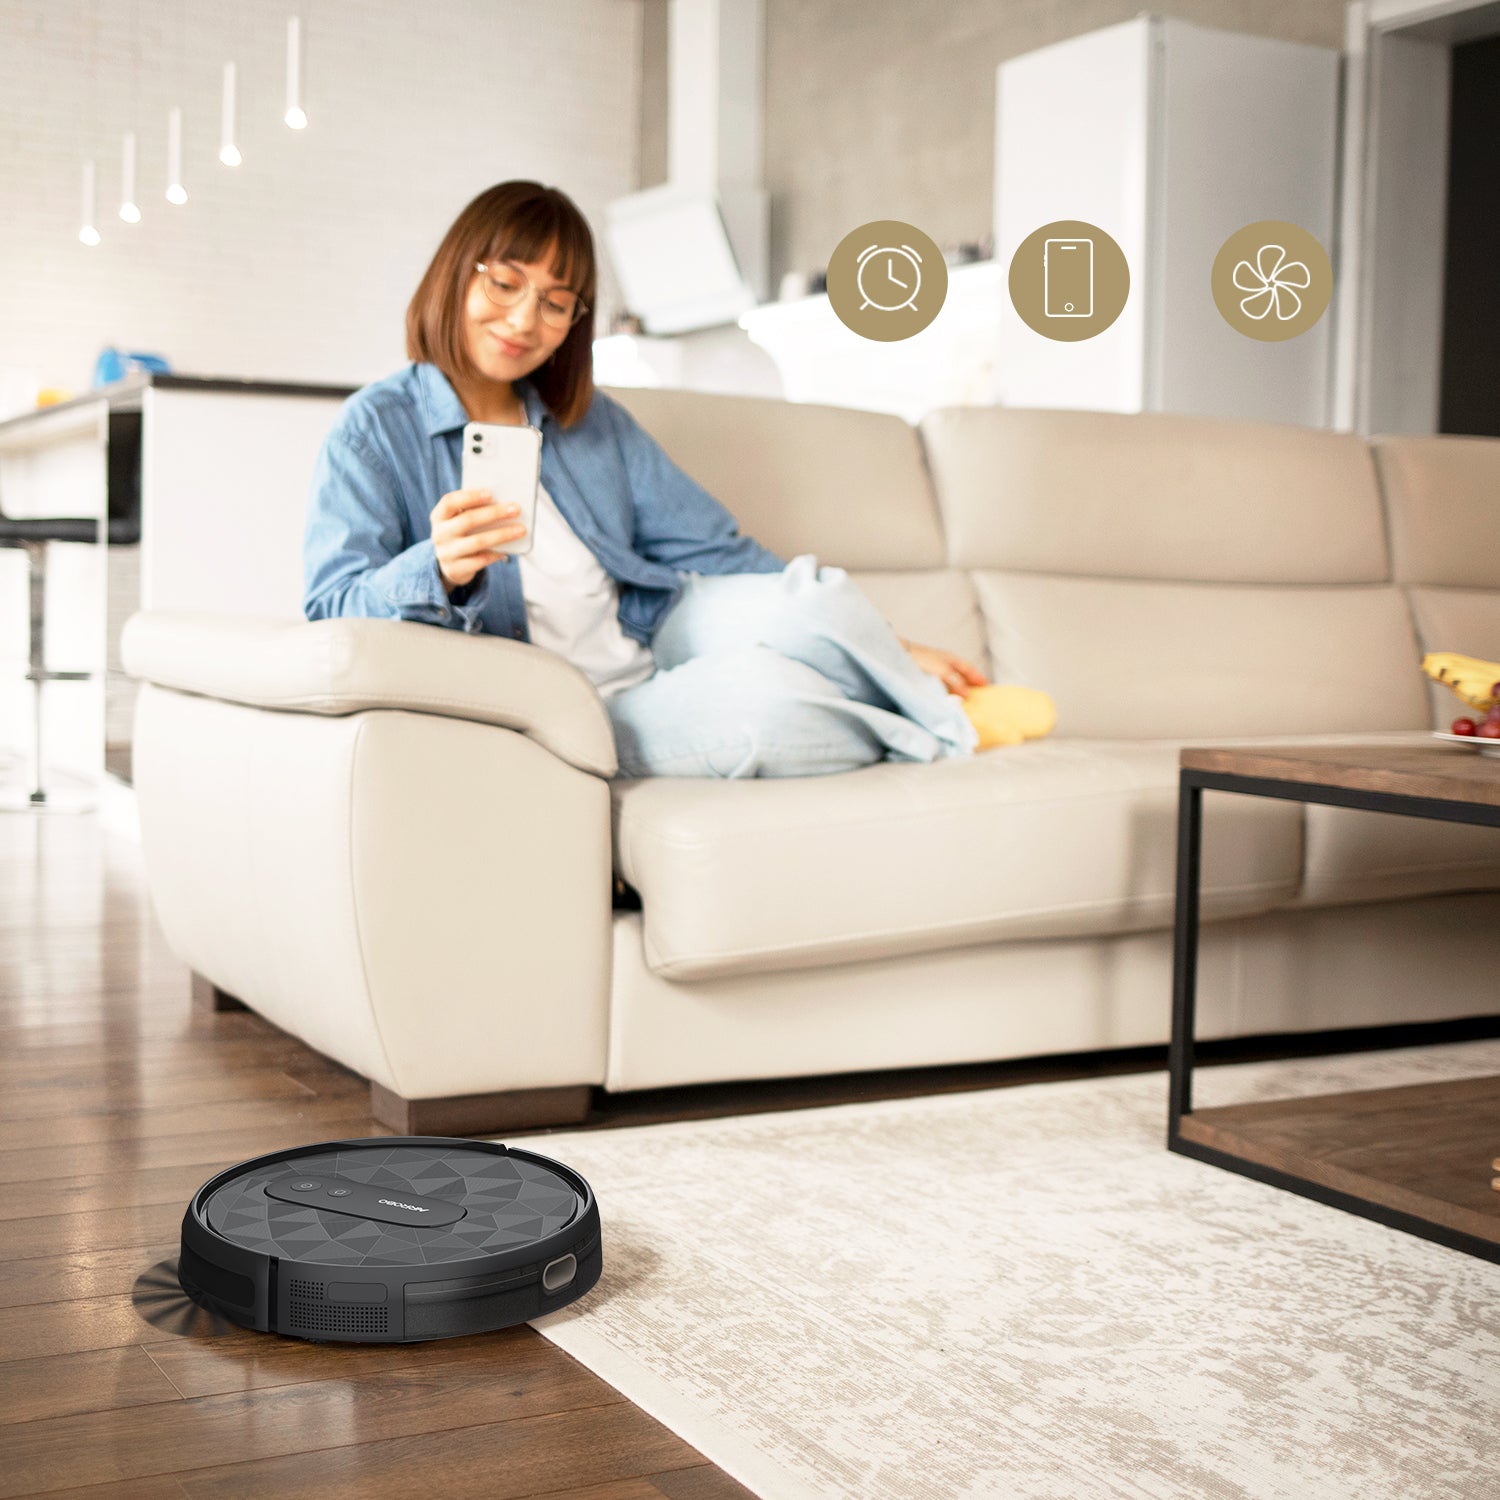 AIRROBO Robot Vacuum P20 review: basic but extremely affordable